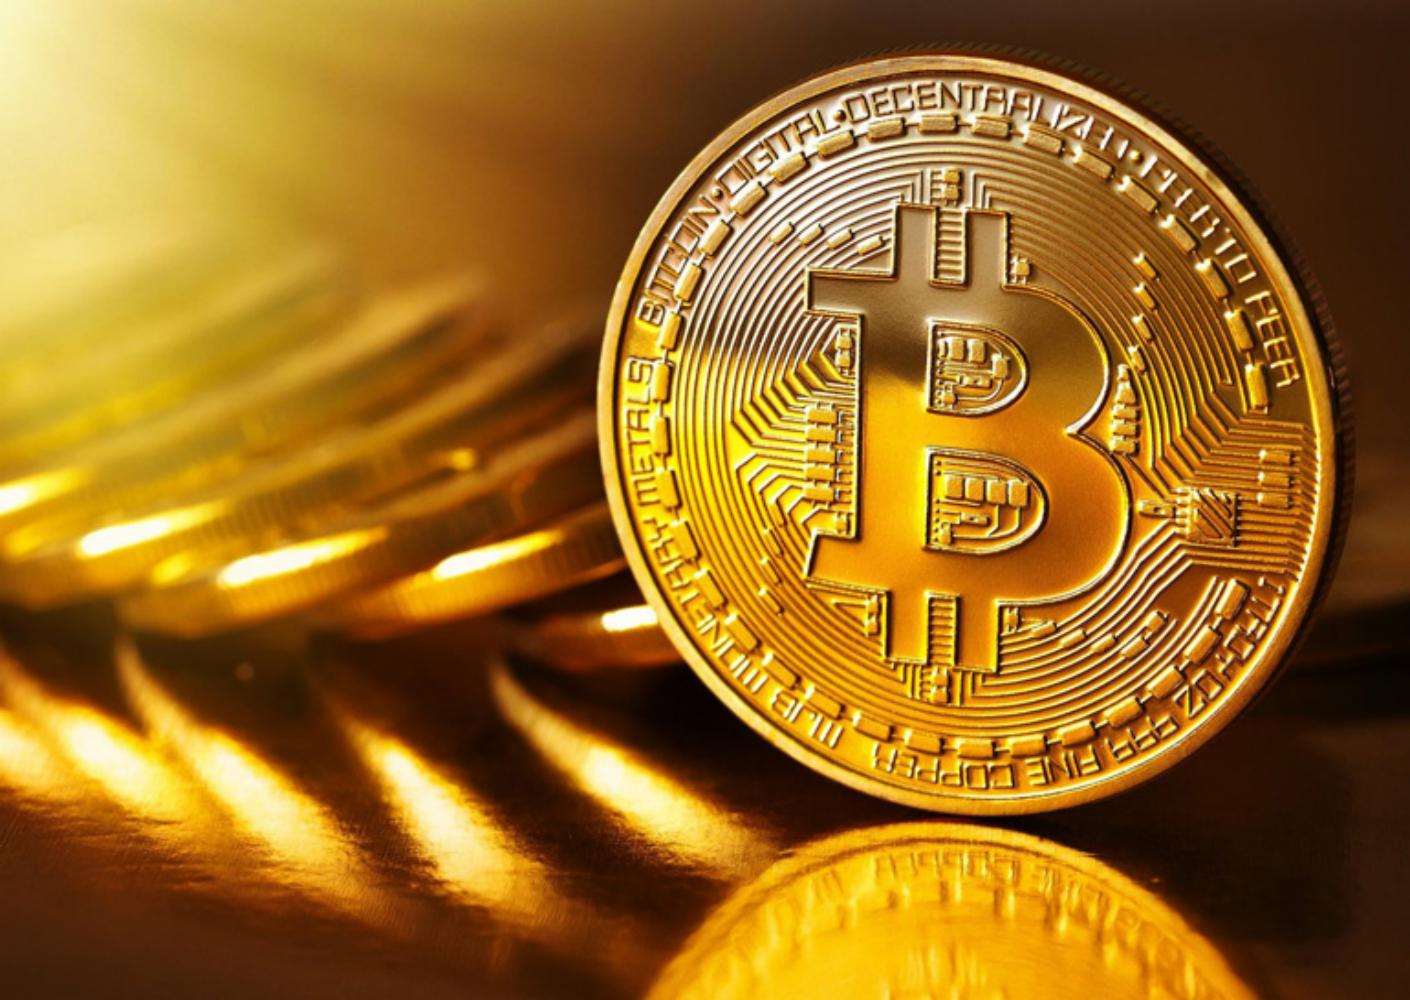 purchase bitcoins anonymously